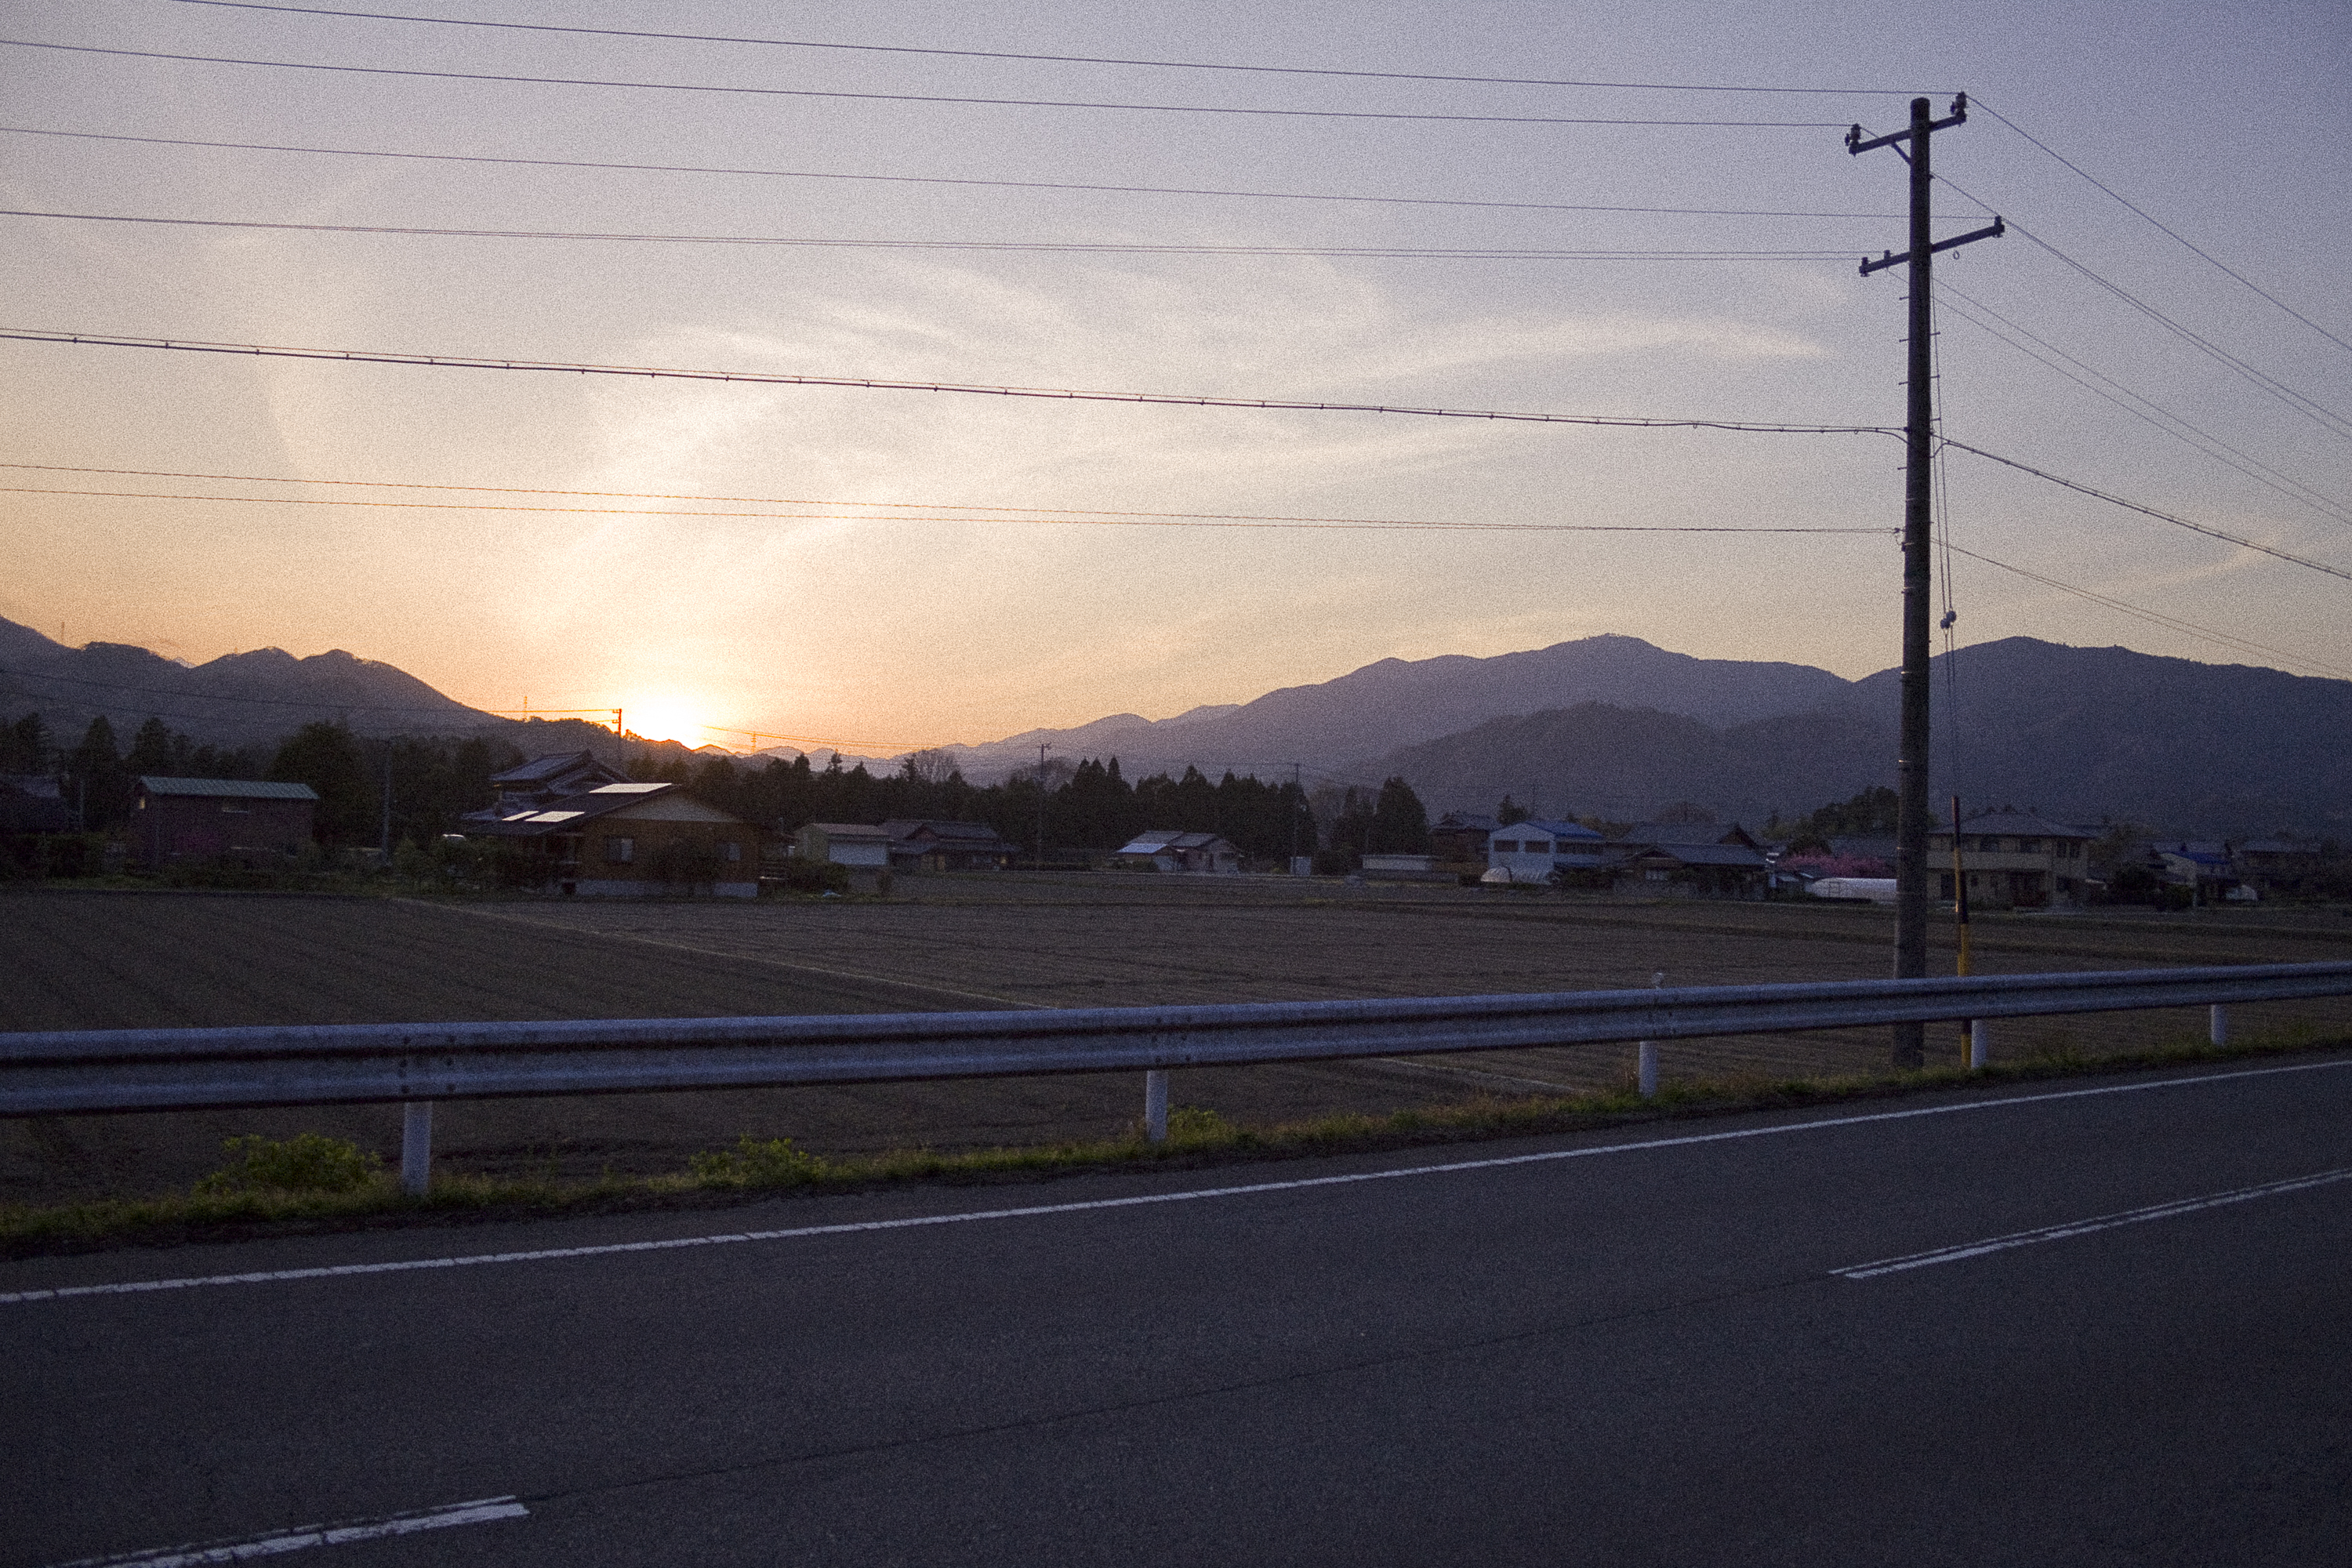 Sunset in Mie Prefecture, Japan